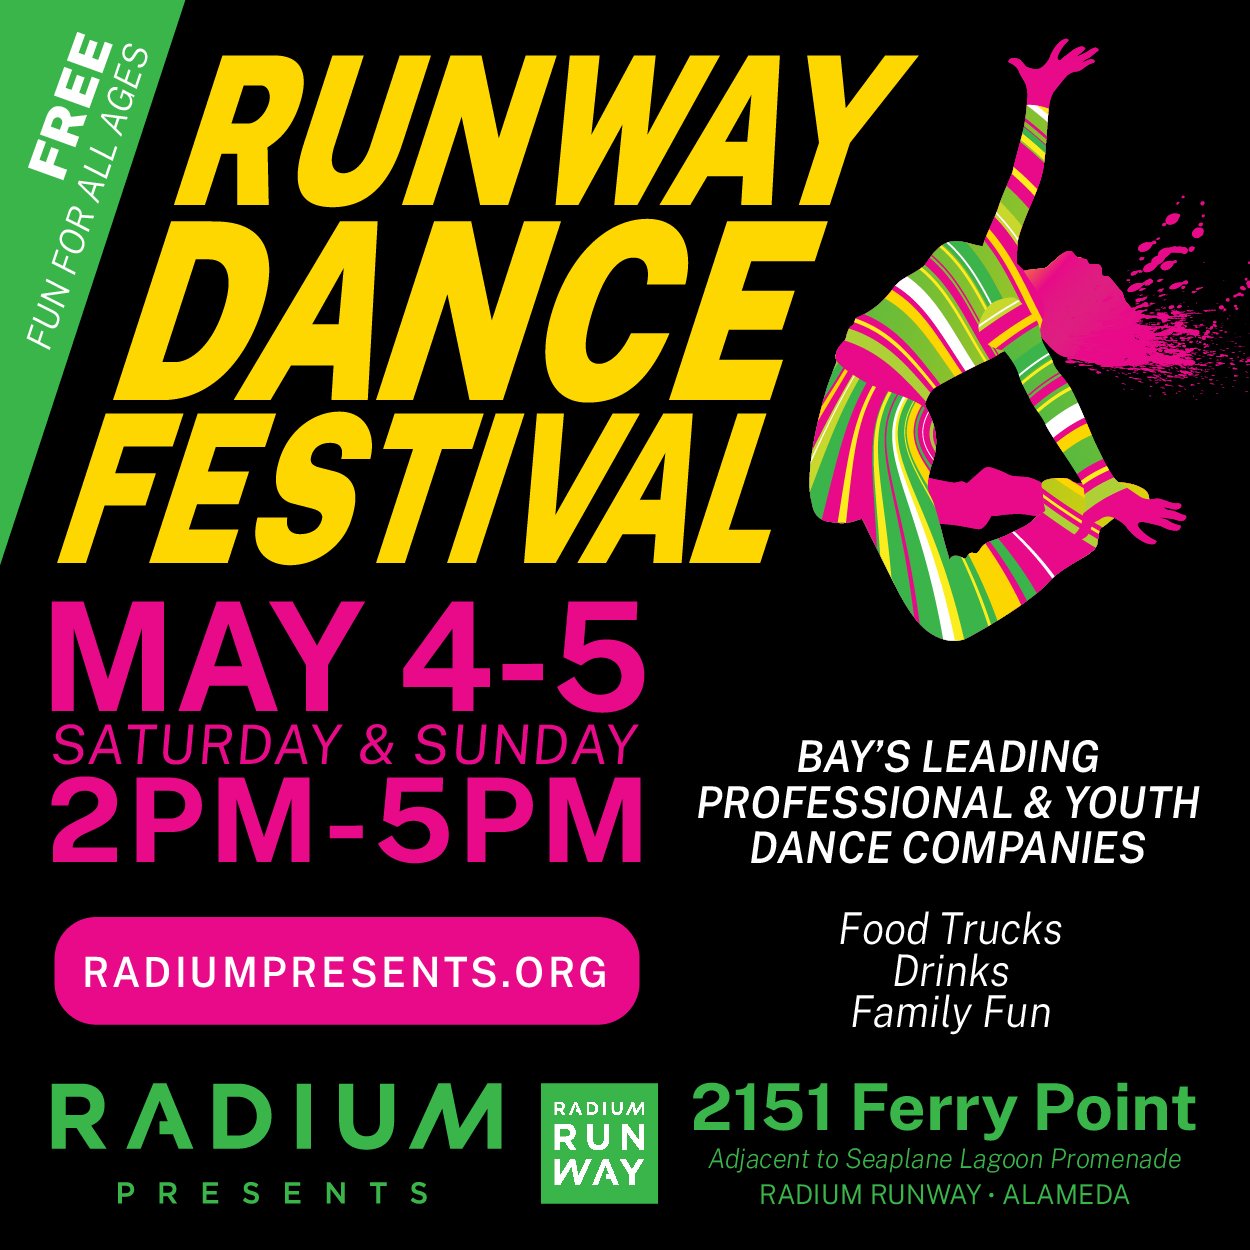 Radium Presents...
RUNWAY DANCE FESTIVAL
Saturday &amp; Sunday, May 4-5 @ 2pm
Free &amp; All Ages

For hardcore dance fans, curious adventurers, and casual drifters, Runway Dance Festival presents two days of dance, music, and stories, celebrating th